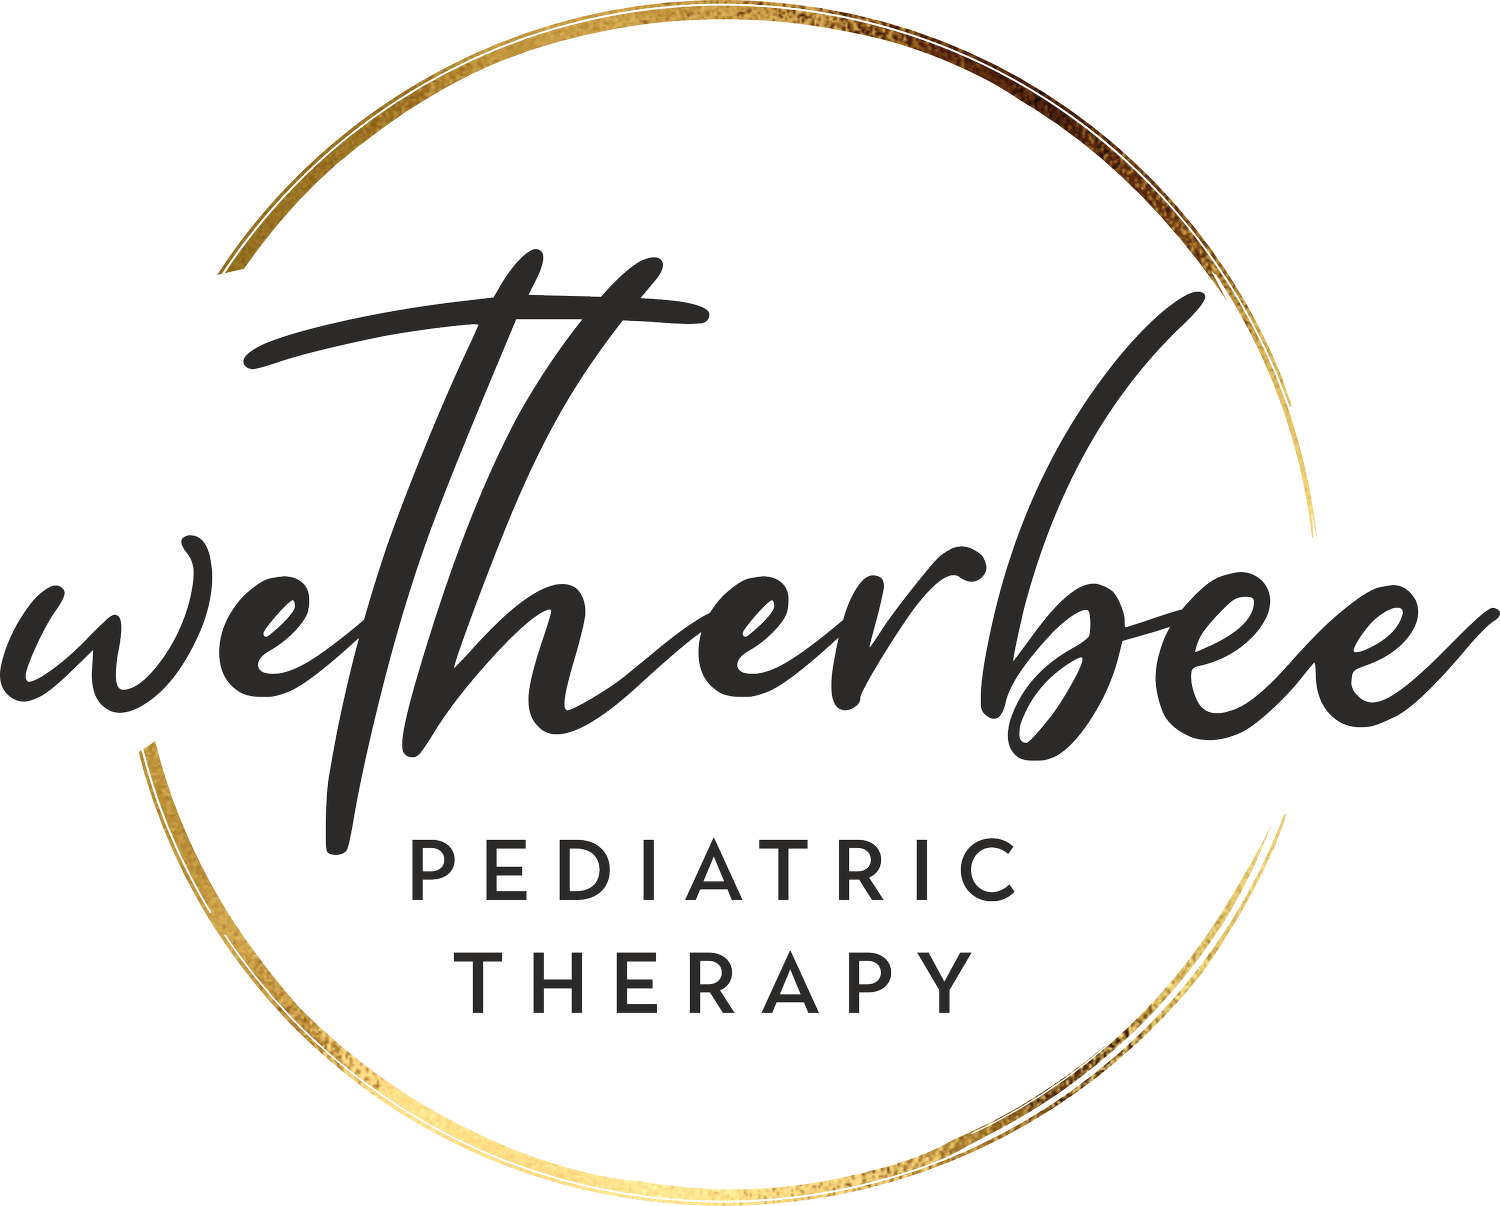 Wetherbee Pediatric Therapy